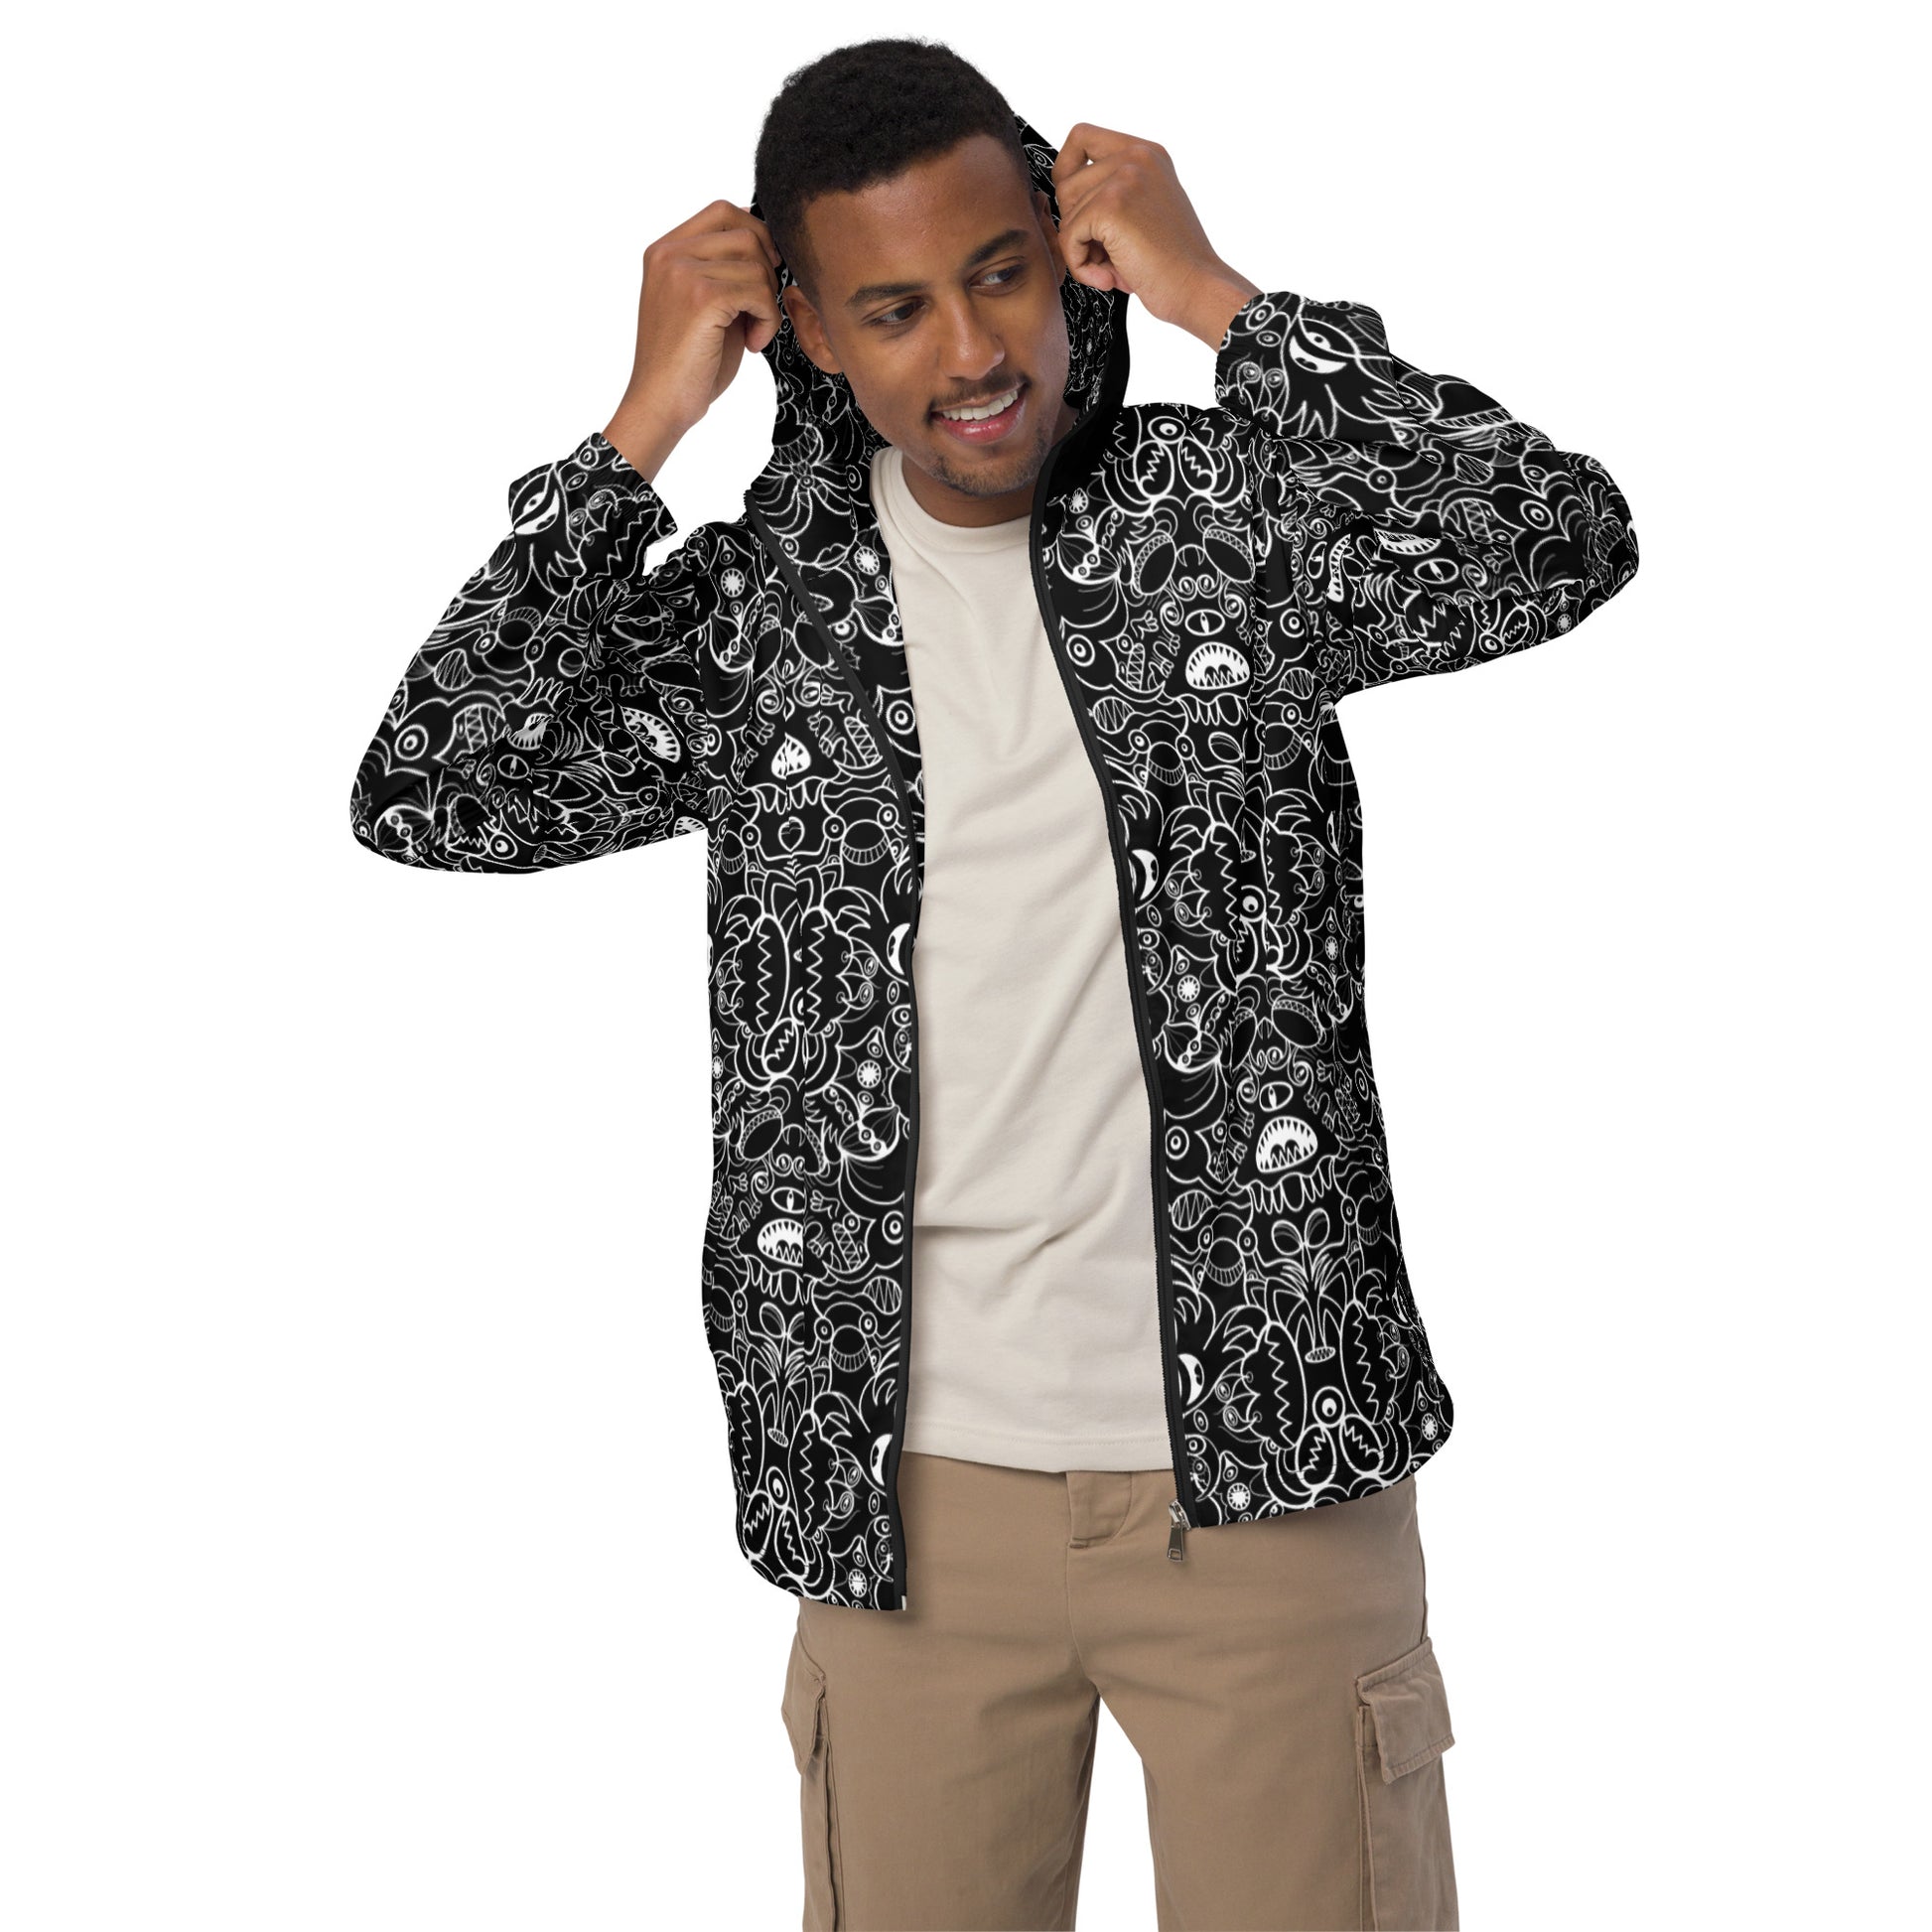 The powerful dark side of the Doodle world Men’s windbreaker. Front view